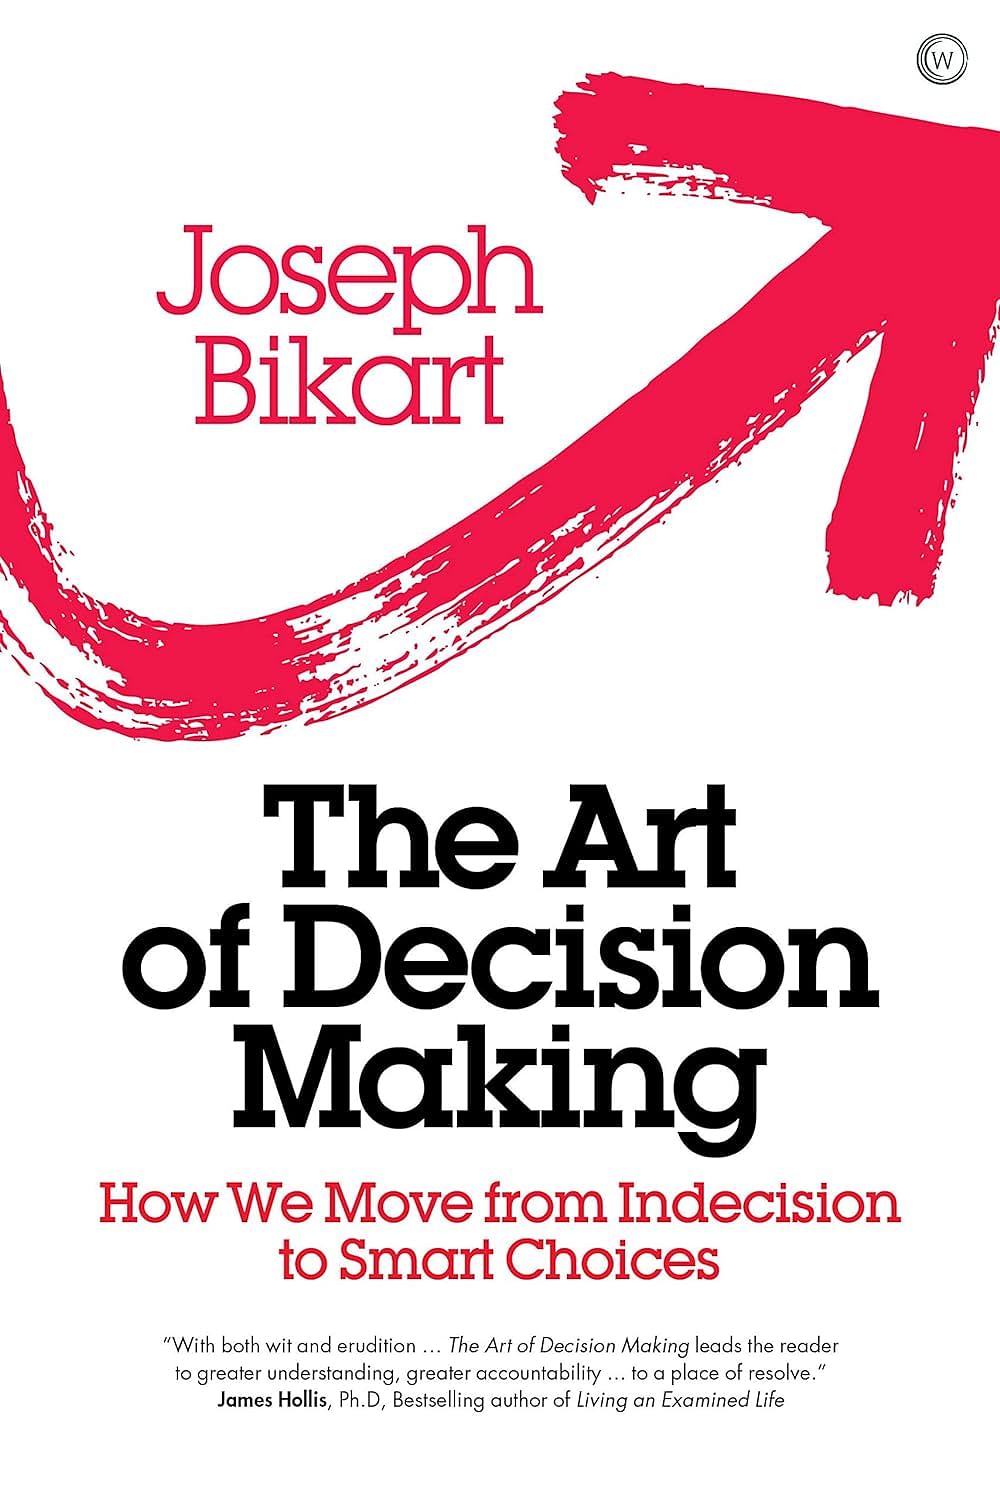 The Art of Decision Making: How we Move from Indecision to Smart Choices - Hardcover – 9 July 2019 - by Joseph Bikart (Author)